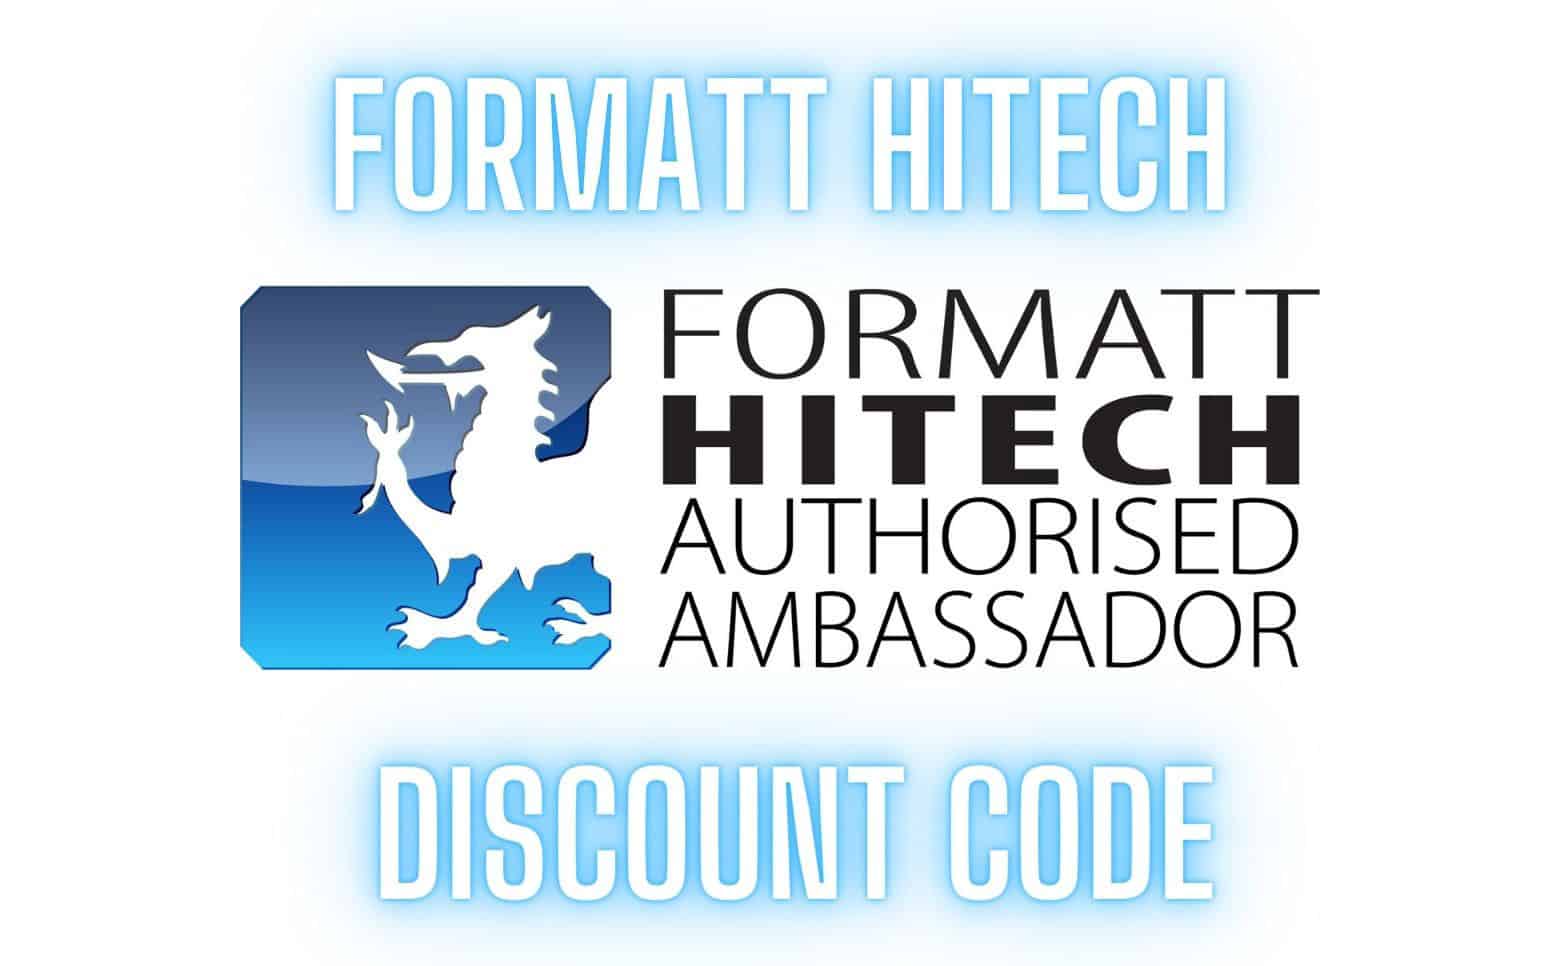 The Formatt Hitech logo and text advertising my Discount code.